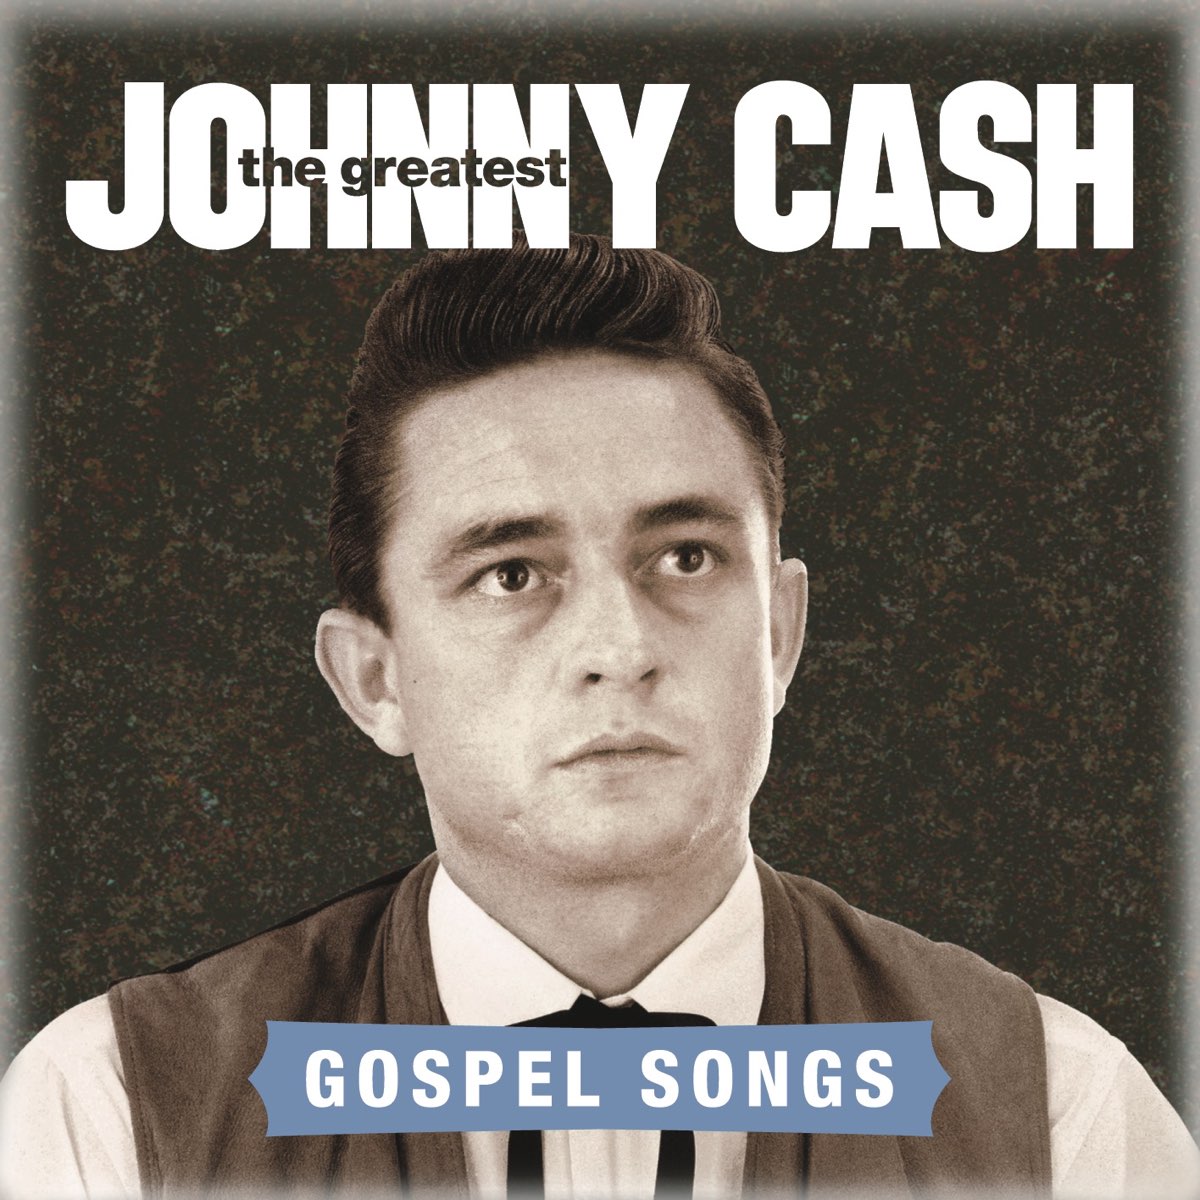 Greatest dad sing along. Johnny Cash Now, there was a Song!.